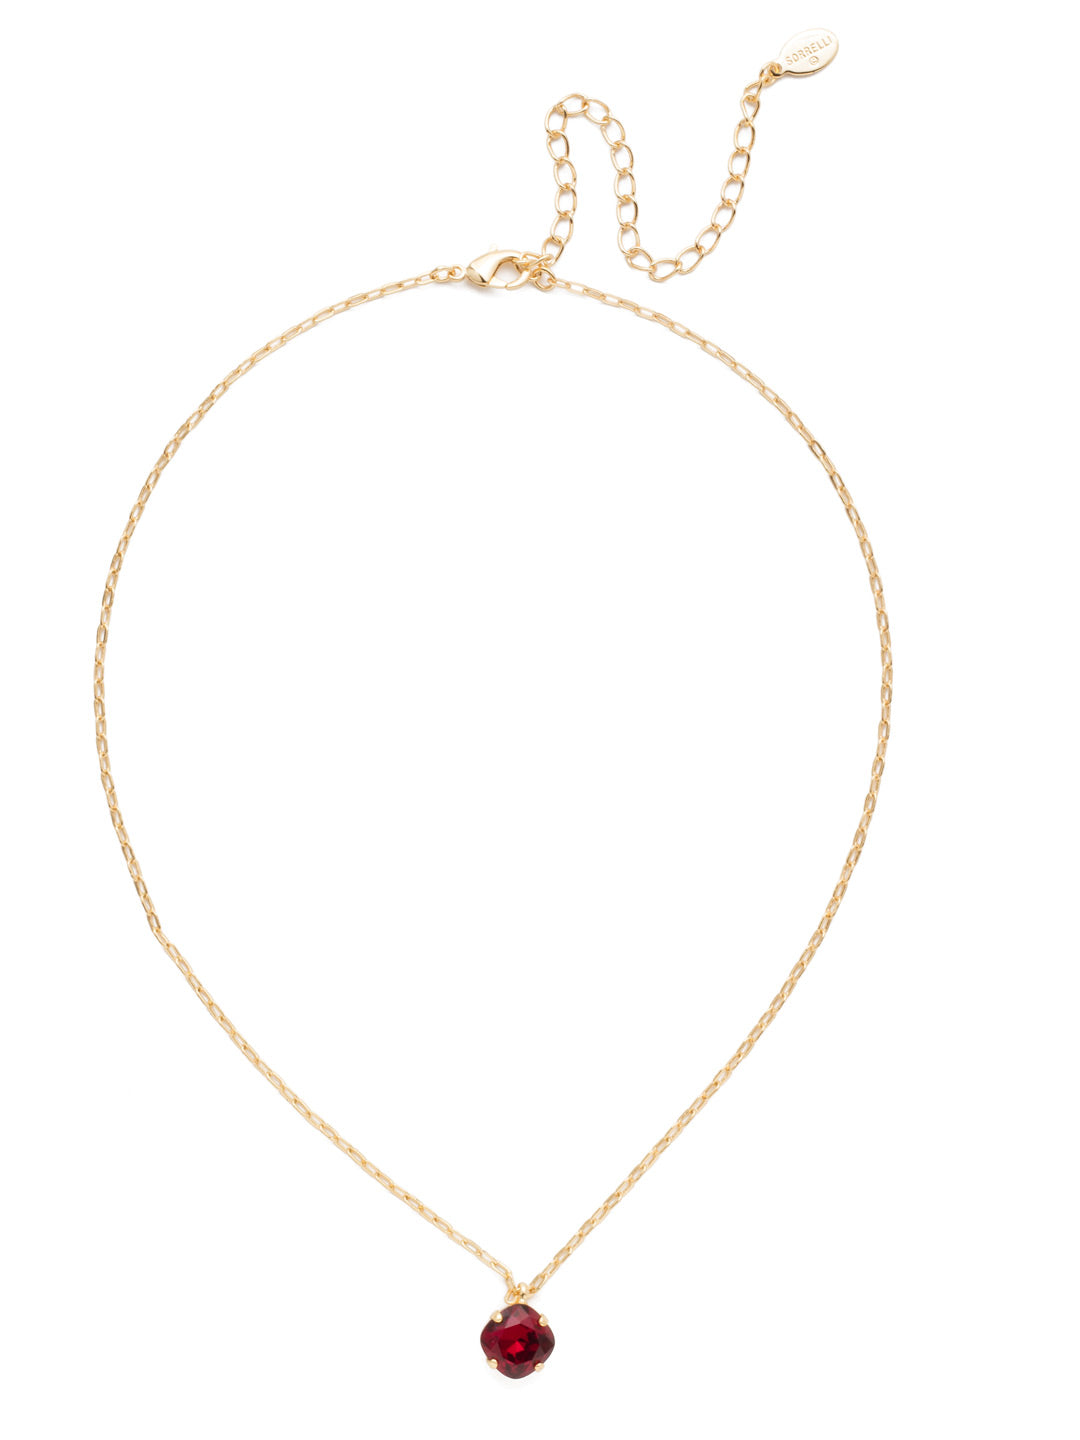 Siren Pendant Necklace - NEP22BGSI - <p>With a cushion-cut crystal and delicate chain, the Siren Pendant  will add a litle sparkle to your everyday look. From Sorrelli's Siam collection in our Bright Gold-tone finish.</p>